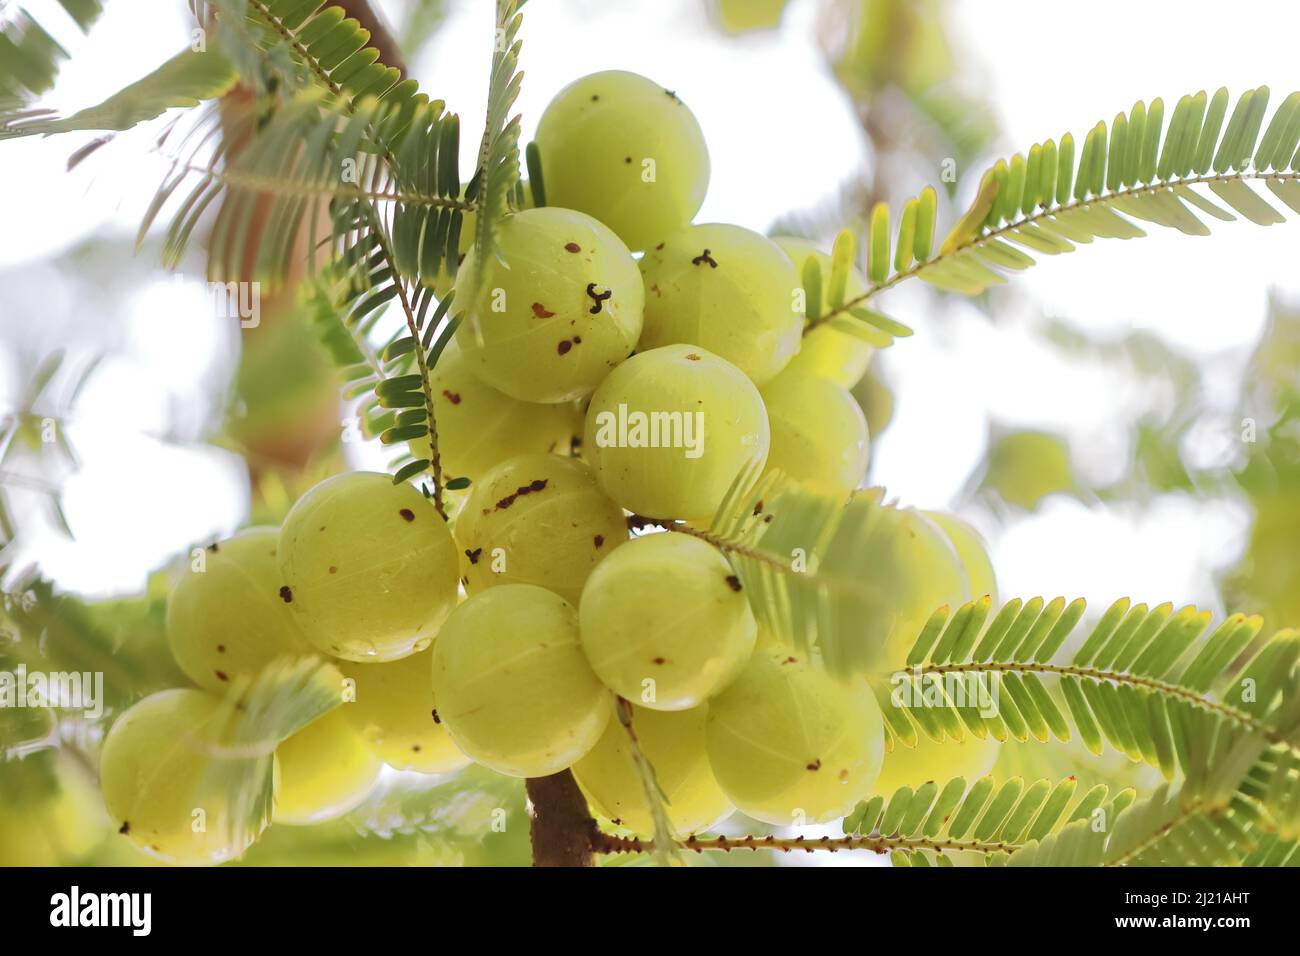 Close-up photo of ripe fresh big size gooseberry ( Indian amla, phyllanthus emblica )fruits in bunches in garden Stock Photo